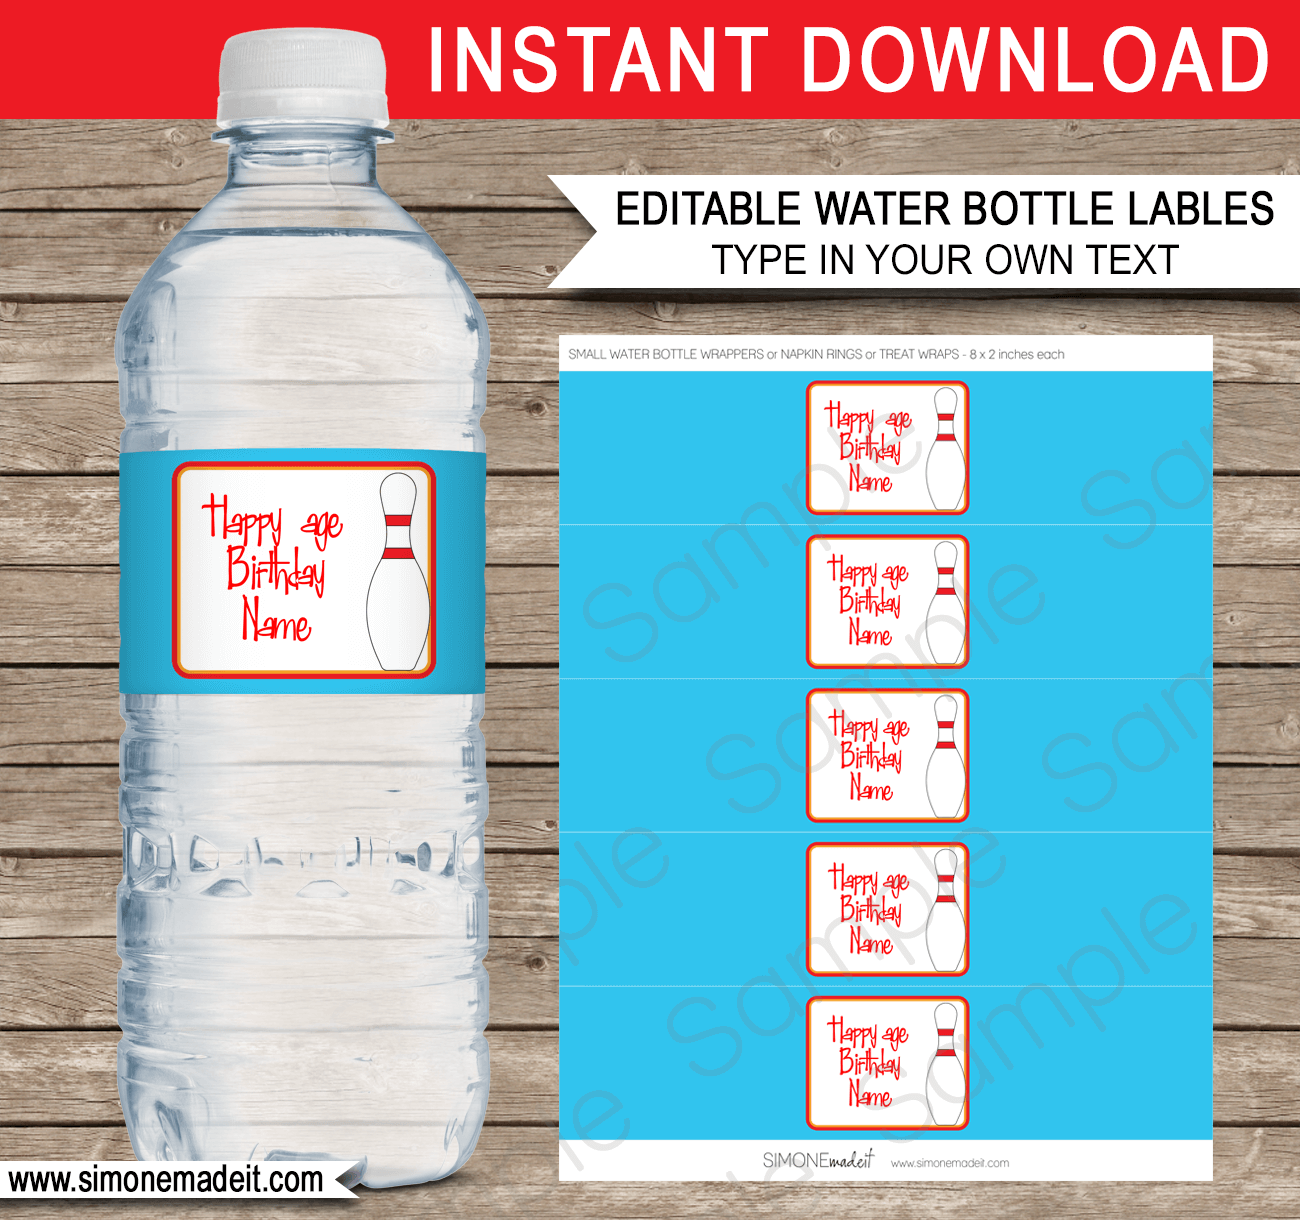 Bowling Party Water Bottle Labels | Bowling Theme Birthday Party Template | Napkin Wraps | Treat Wraps | DIY Editable & Printable Template | INSTANT DOWNLOAD via simonemadeit.com